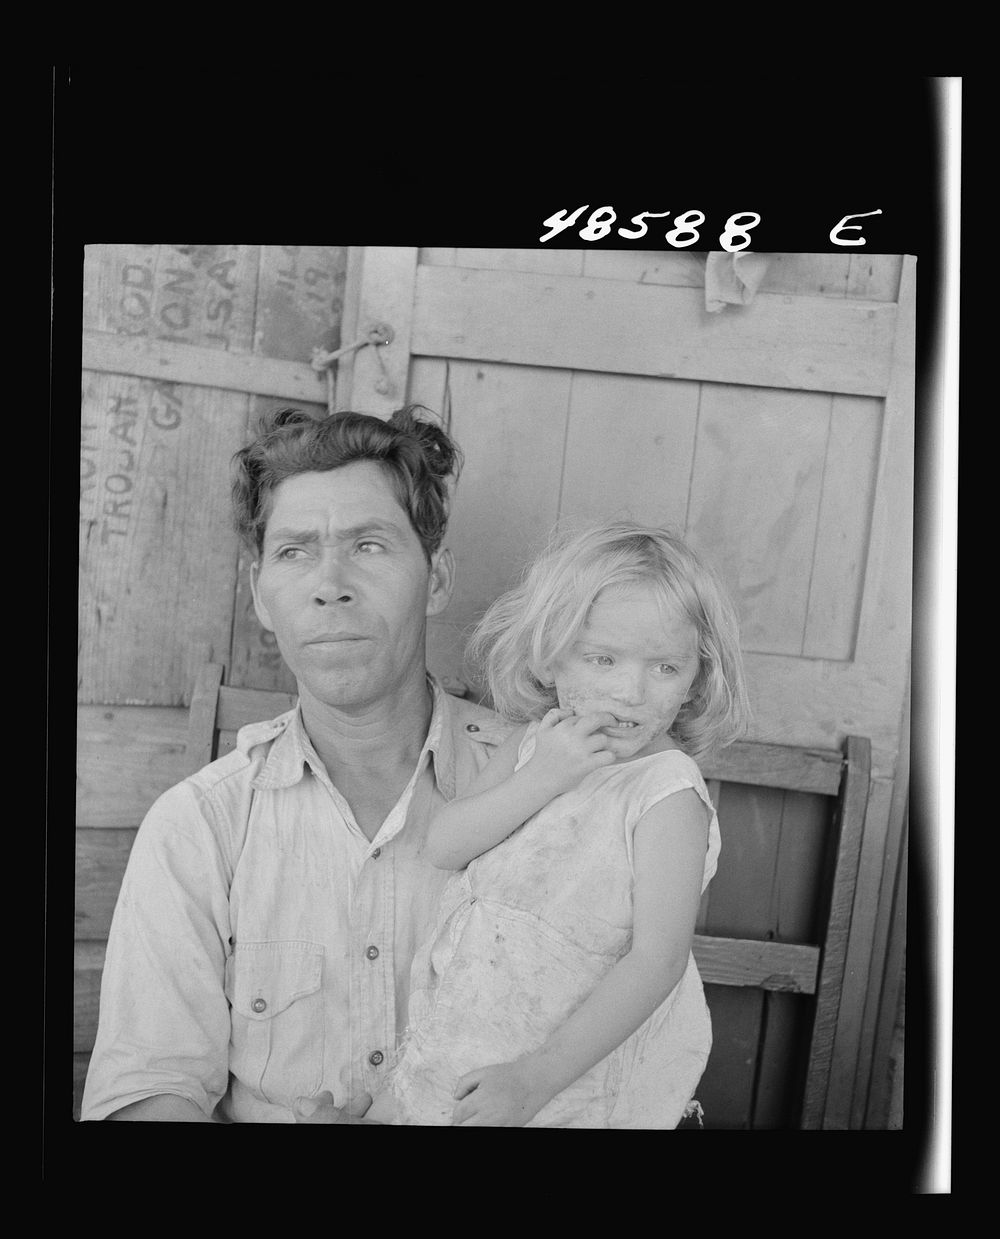 [Untitled photo, possibly related to: San Juan, Puerto Rico. People living in El Fangitto, the slum area]. Sourced from the…